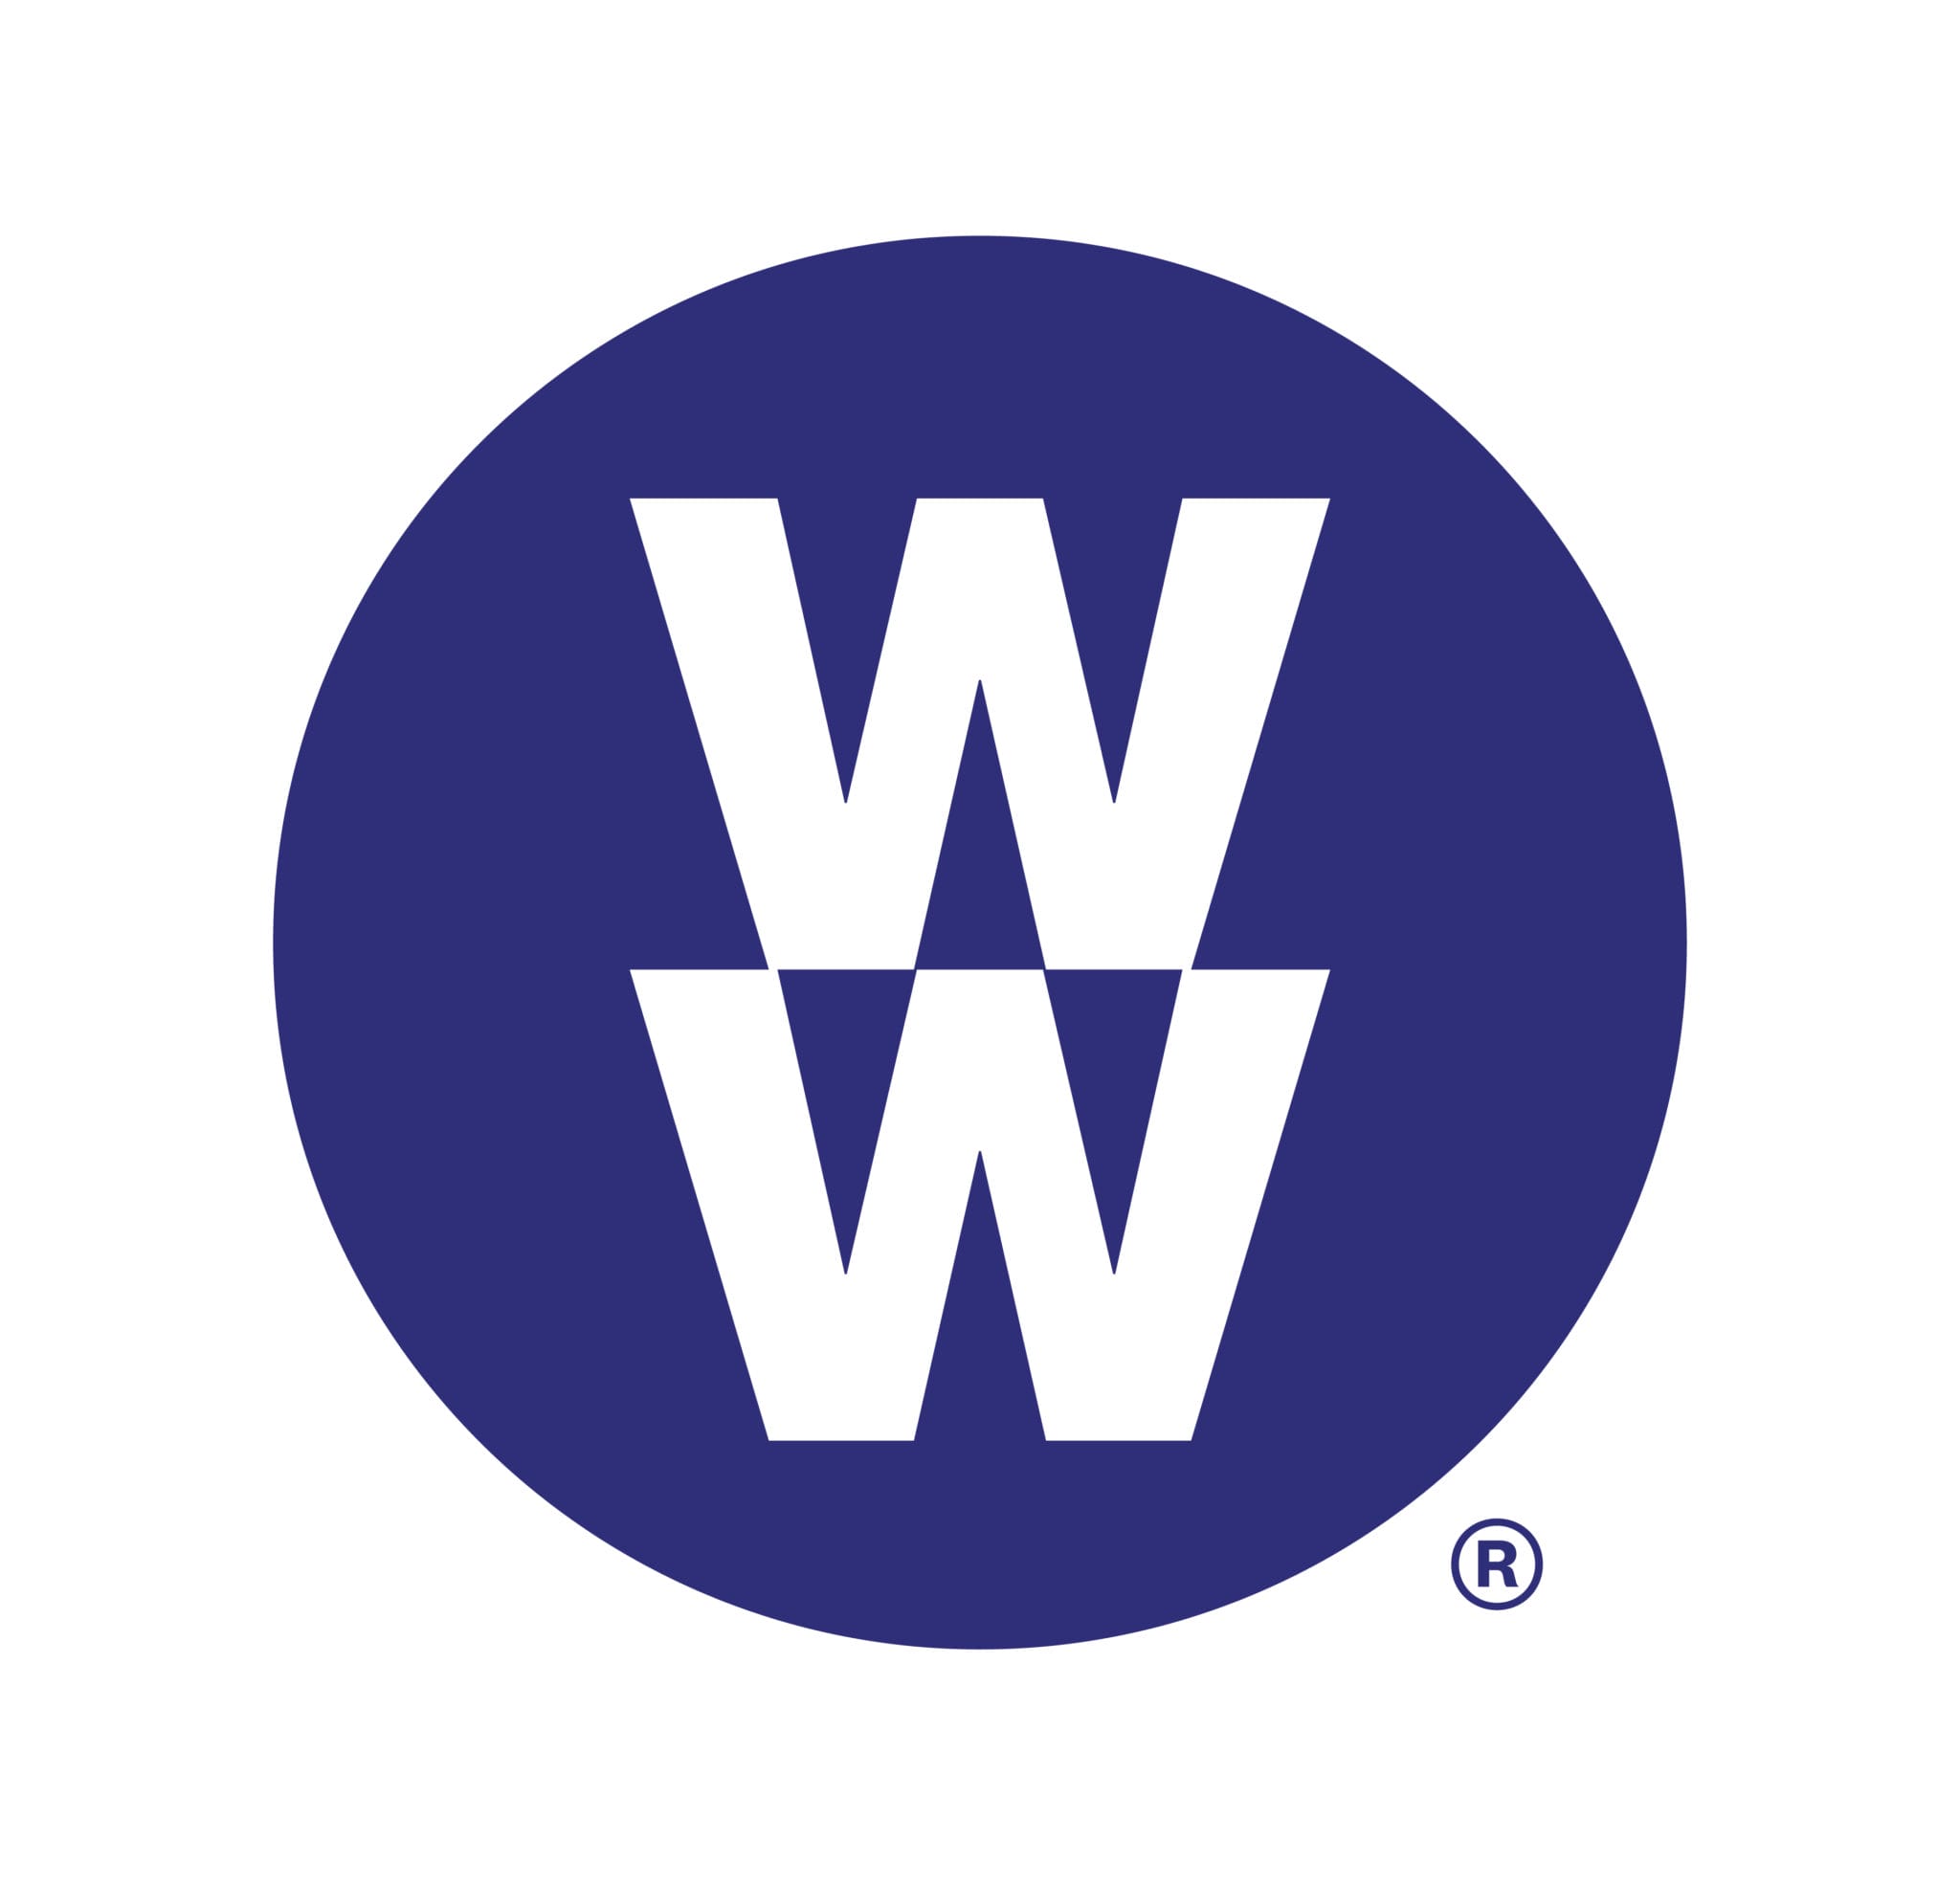 Logo of weight watchers featuring a white double 'w' on a blue circular background with a registered trademark symbol.